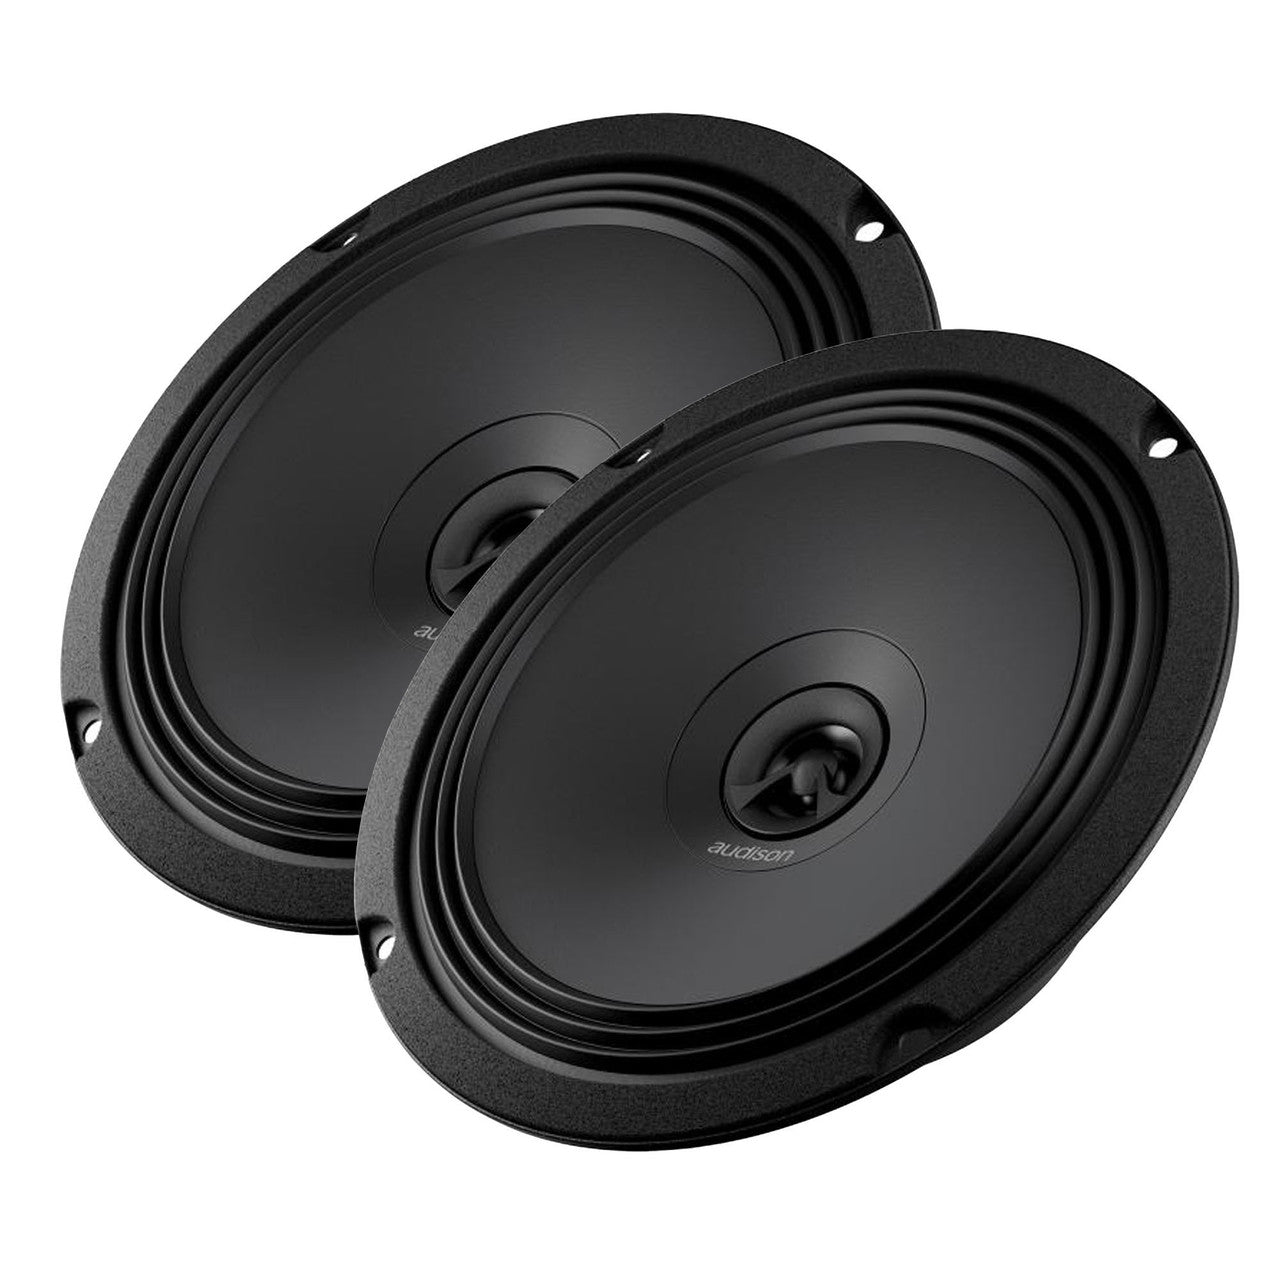 Audison F-150-15-17-5.9-NS Audison Front, Rear, Amp, and 8" Sub Bundle Compatible with 15-17 Ford F-150 Non Sony Sound Systems